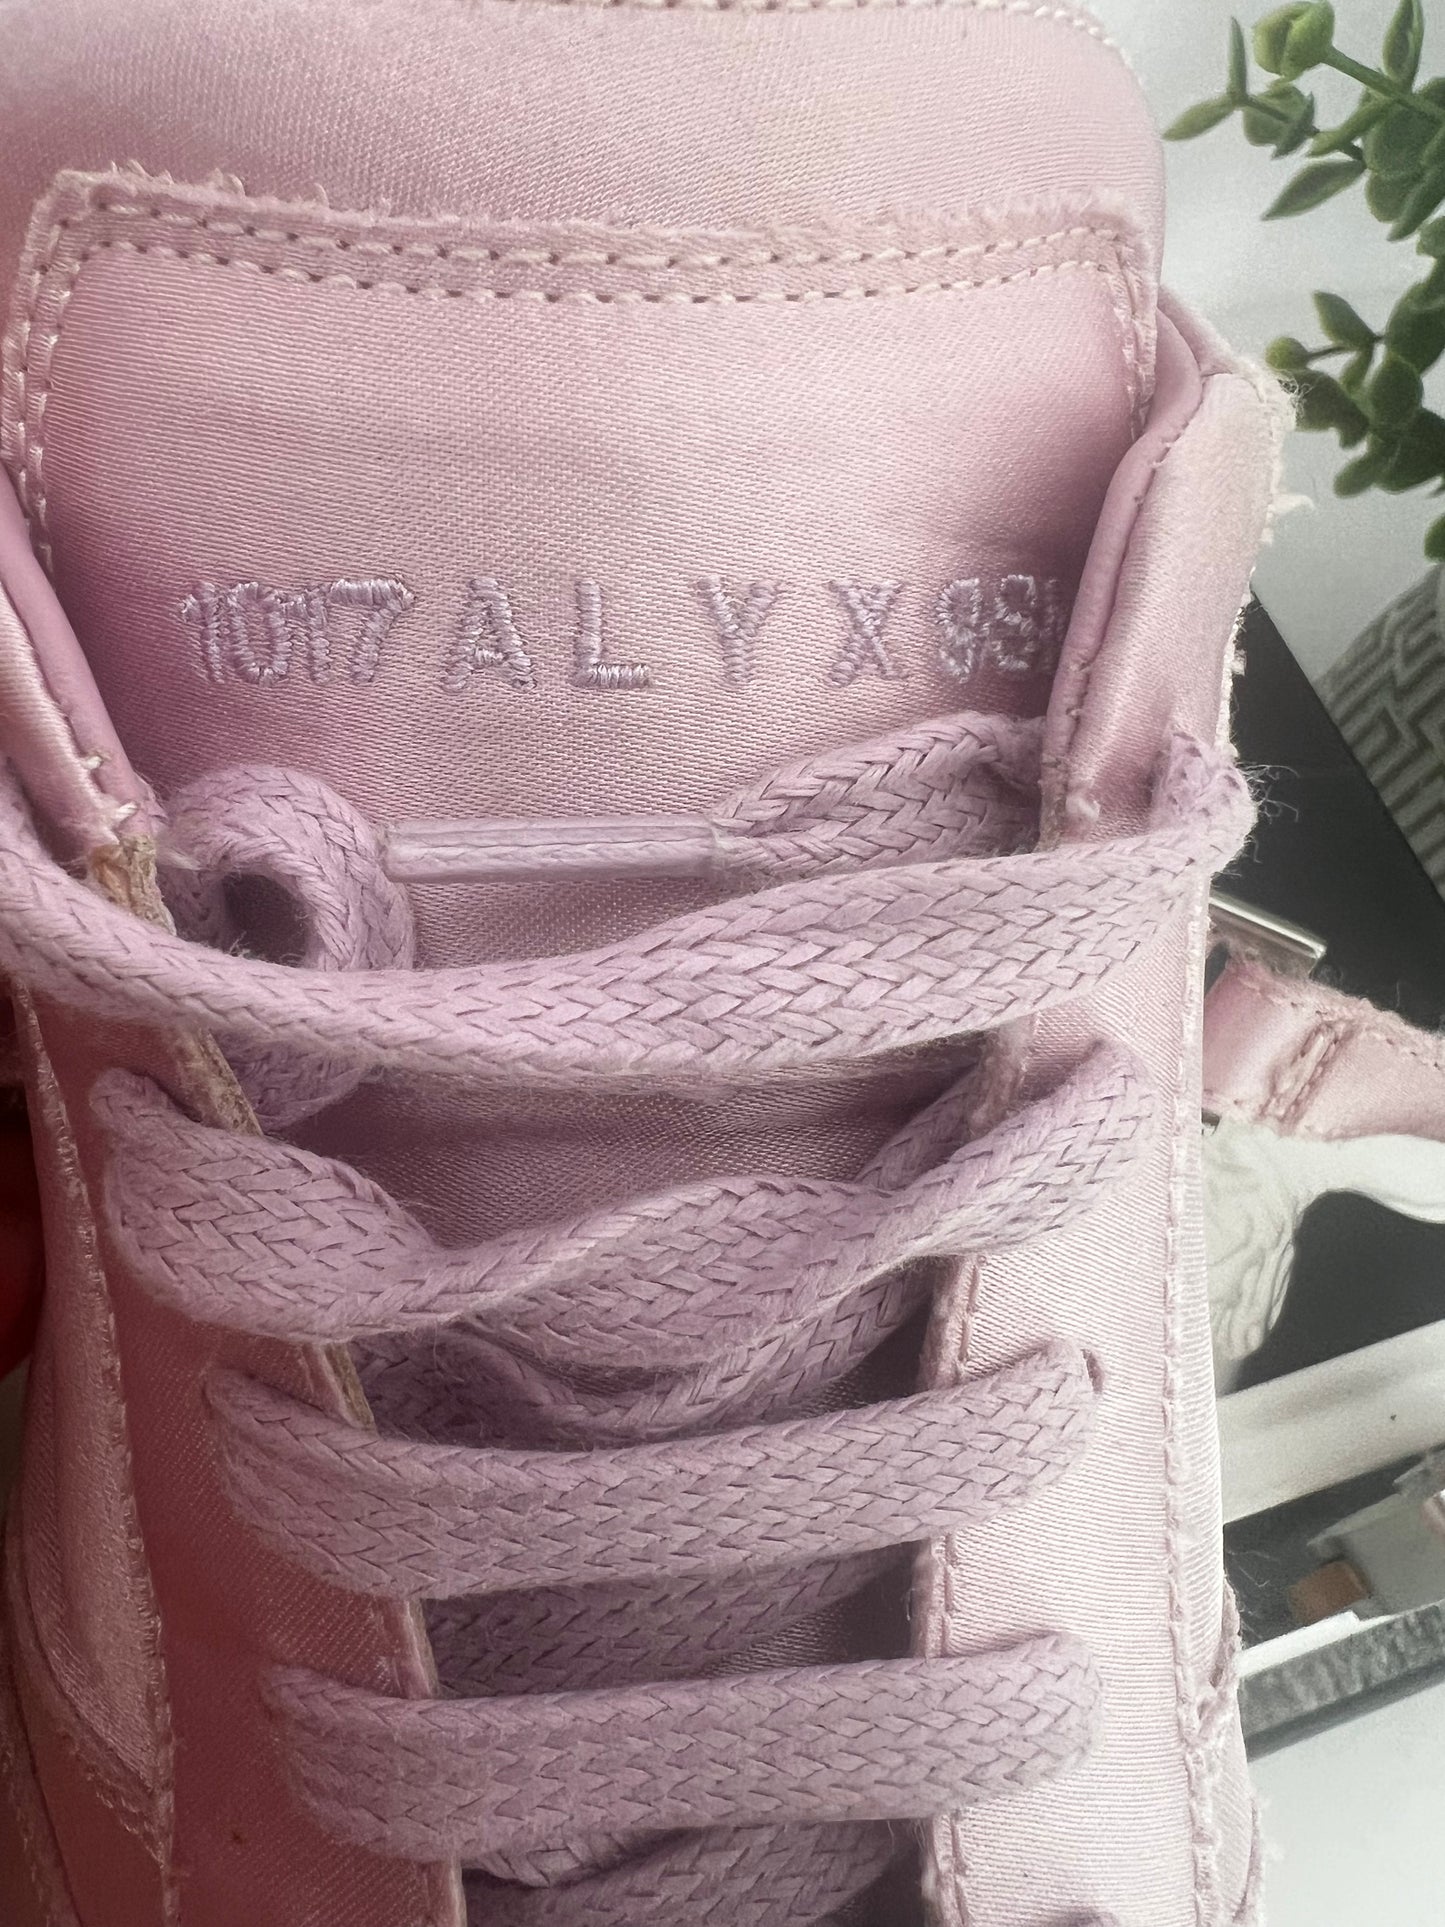 1017 ALYX 9SM Pink Satin Buckle Detail Low Top Sneakers Size 40 US 10